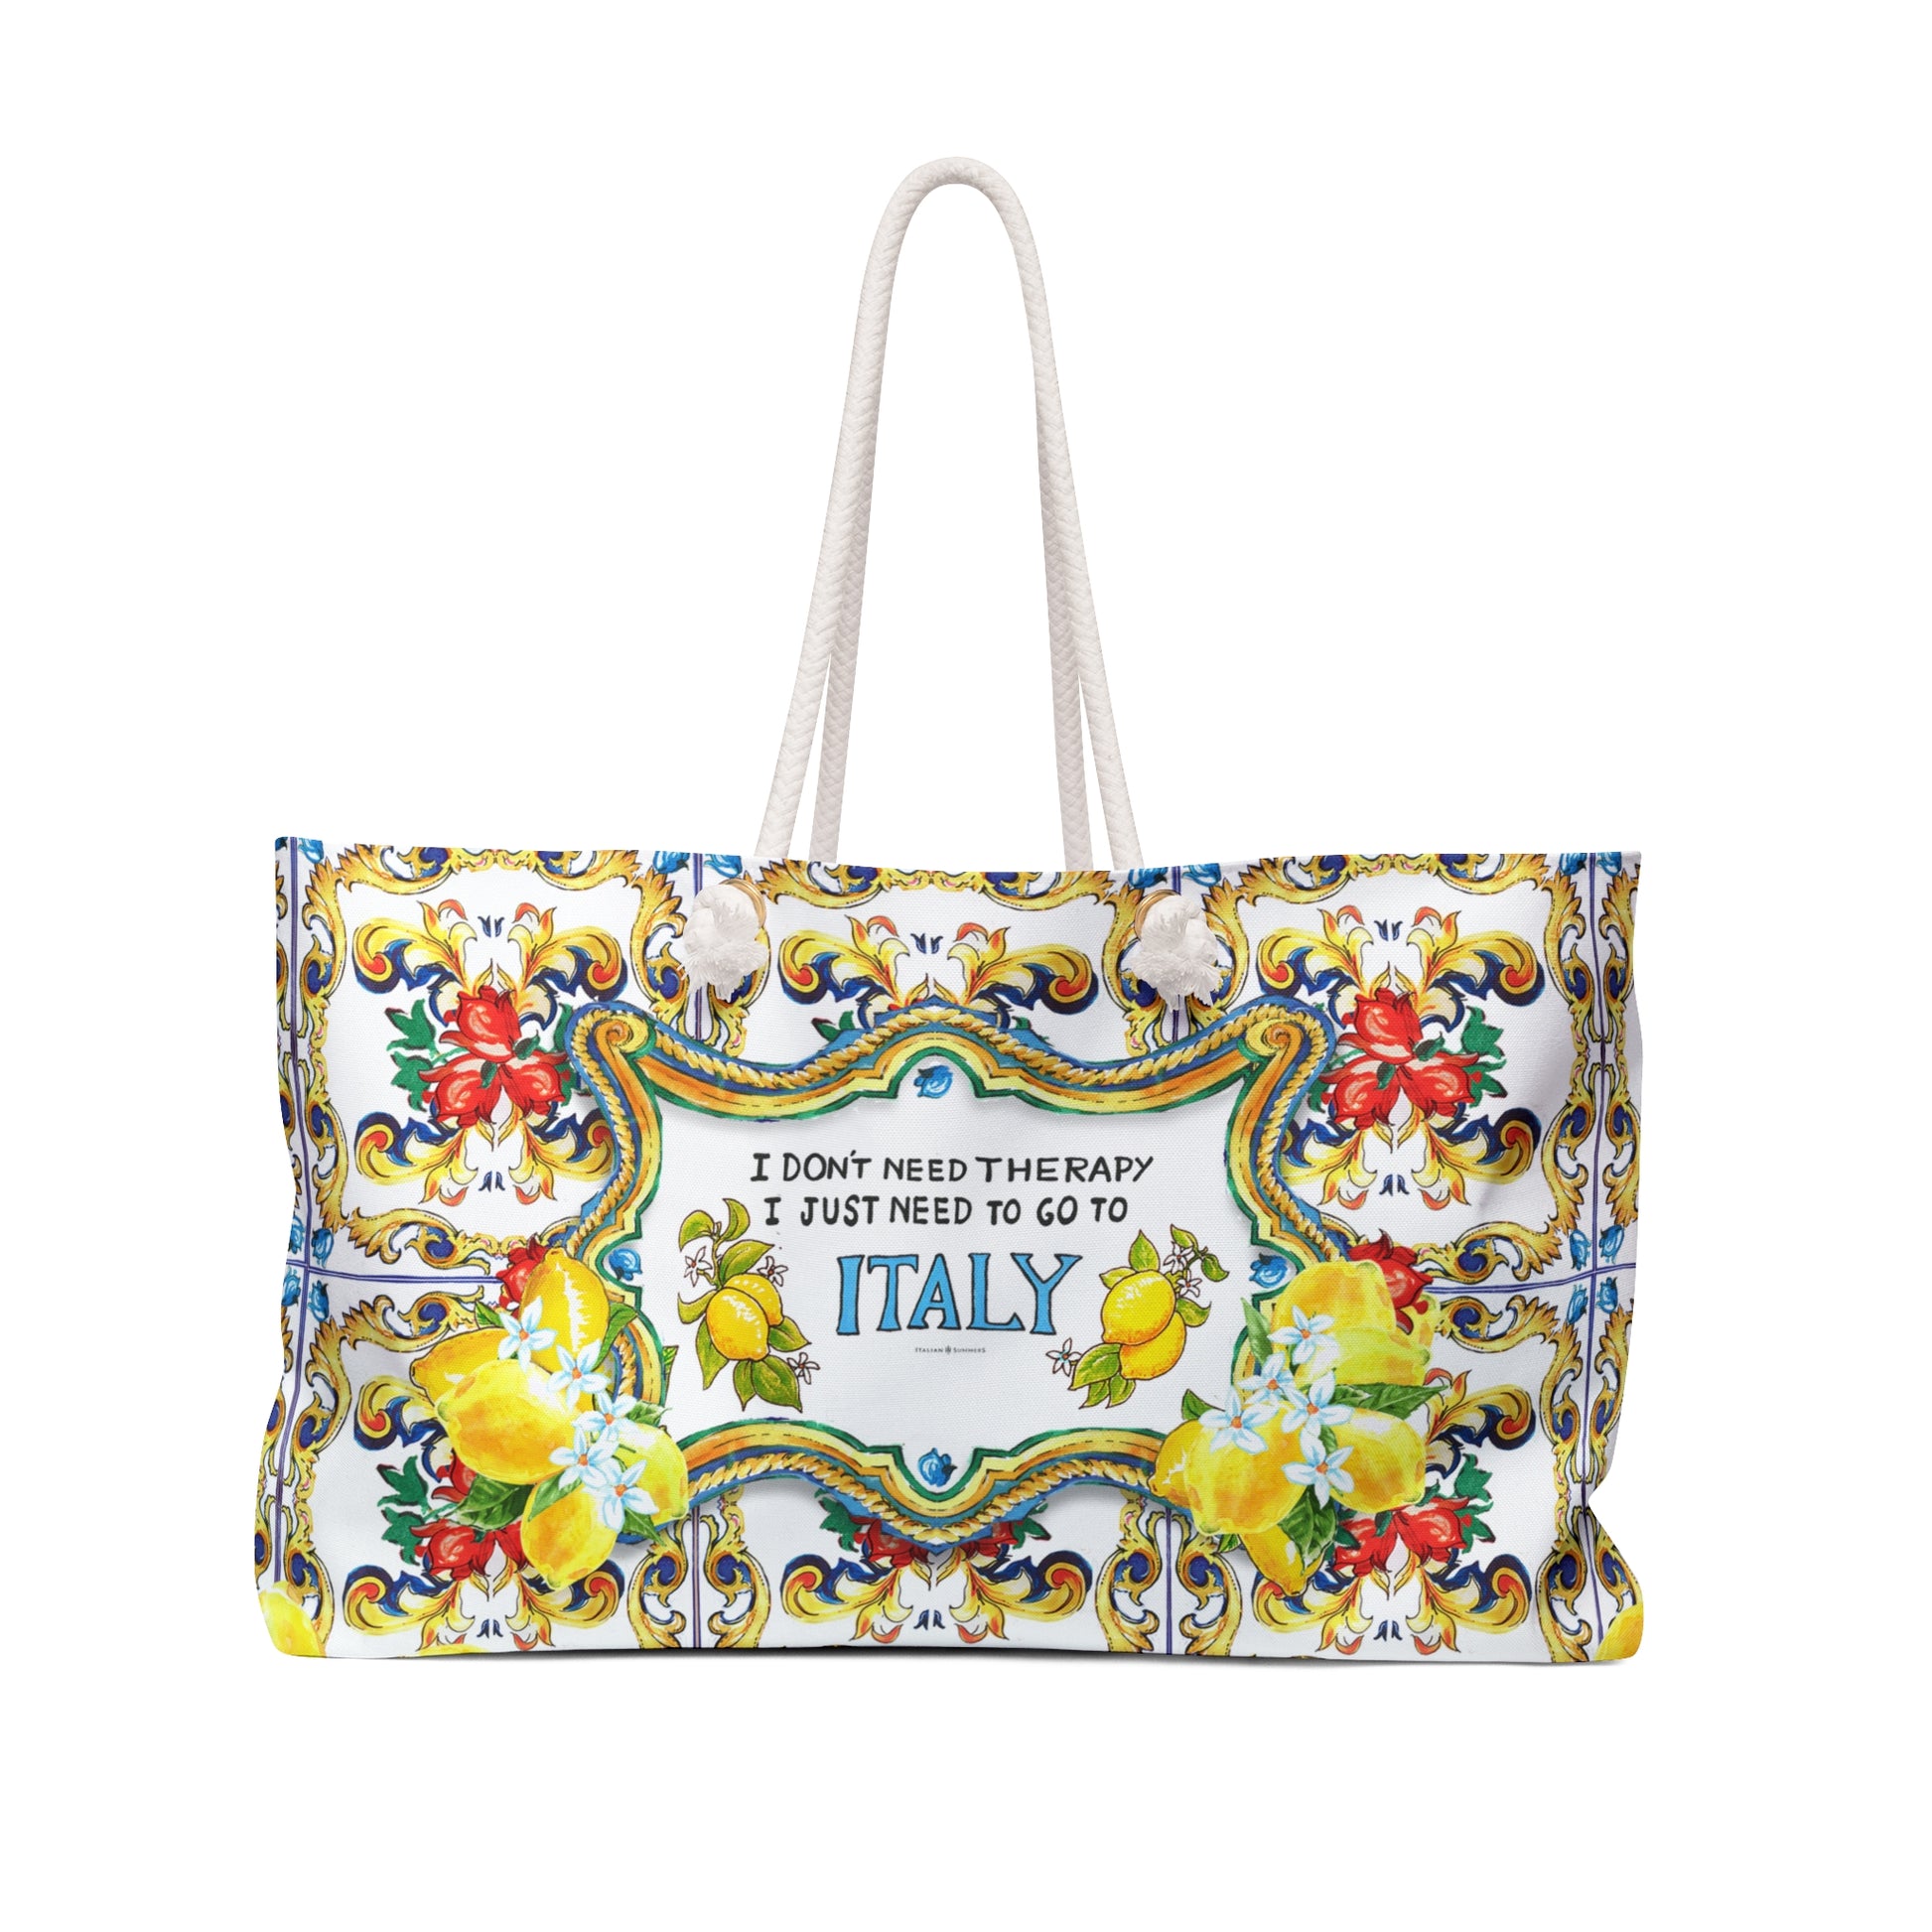 Italy, Sicily inspired beach bag with the quote I don't need therapy, I just need to go to Italy. Next to the word Italy are on both sides Sorrento lemons. The quote is surrounded by Sicilian baroque convolutes and big lemons. On the background there are Sicilian tiles. The bag is printed on two sides and has soft rope handles